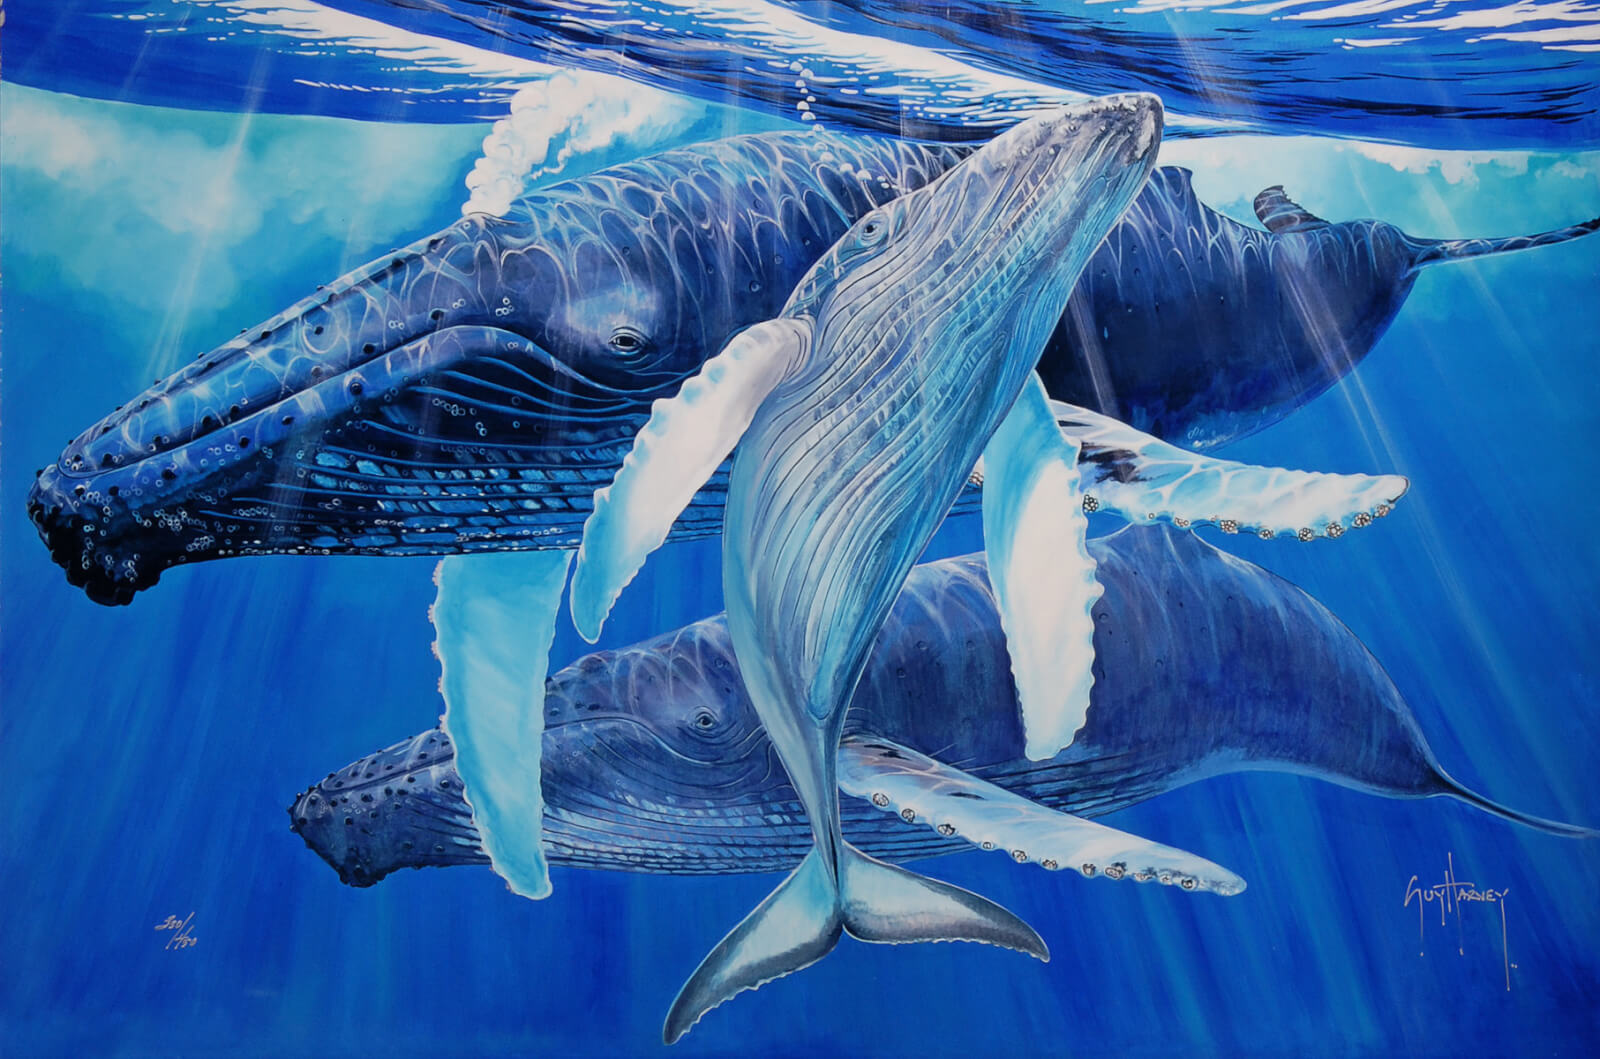 "Mother's Touch" (2015), Guy Harvey